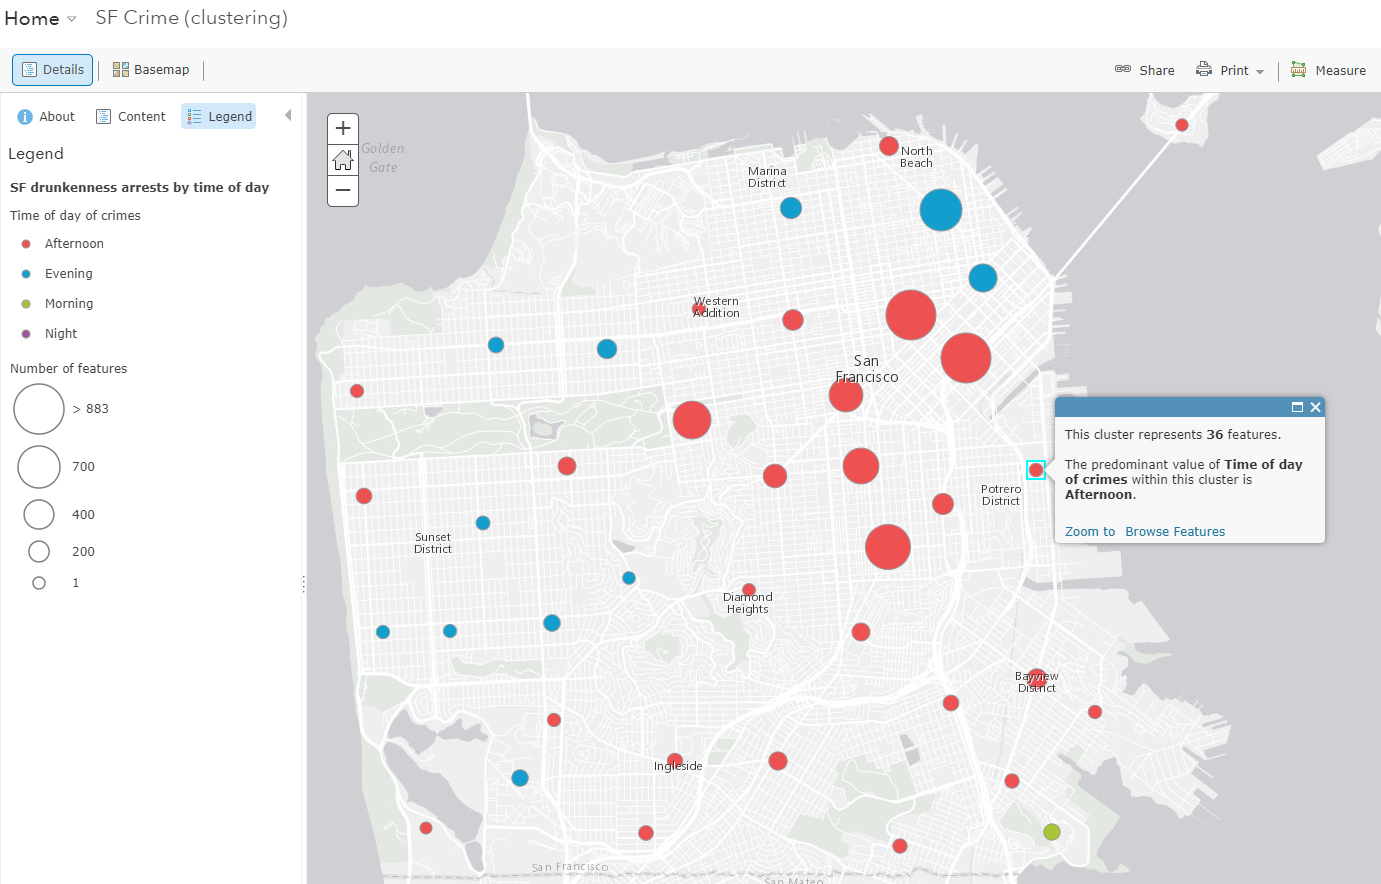 Clustering the layer “SF Crime” using the new “Time of day of crimes” field. Red circles indicate afternoon drunkenness arrests.